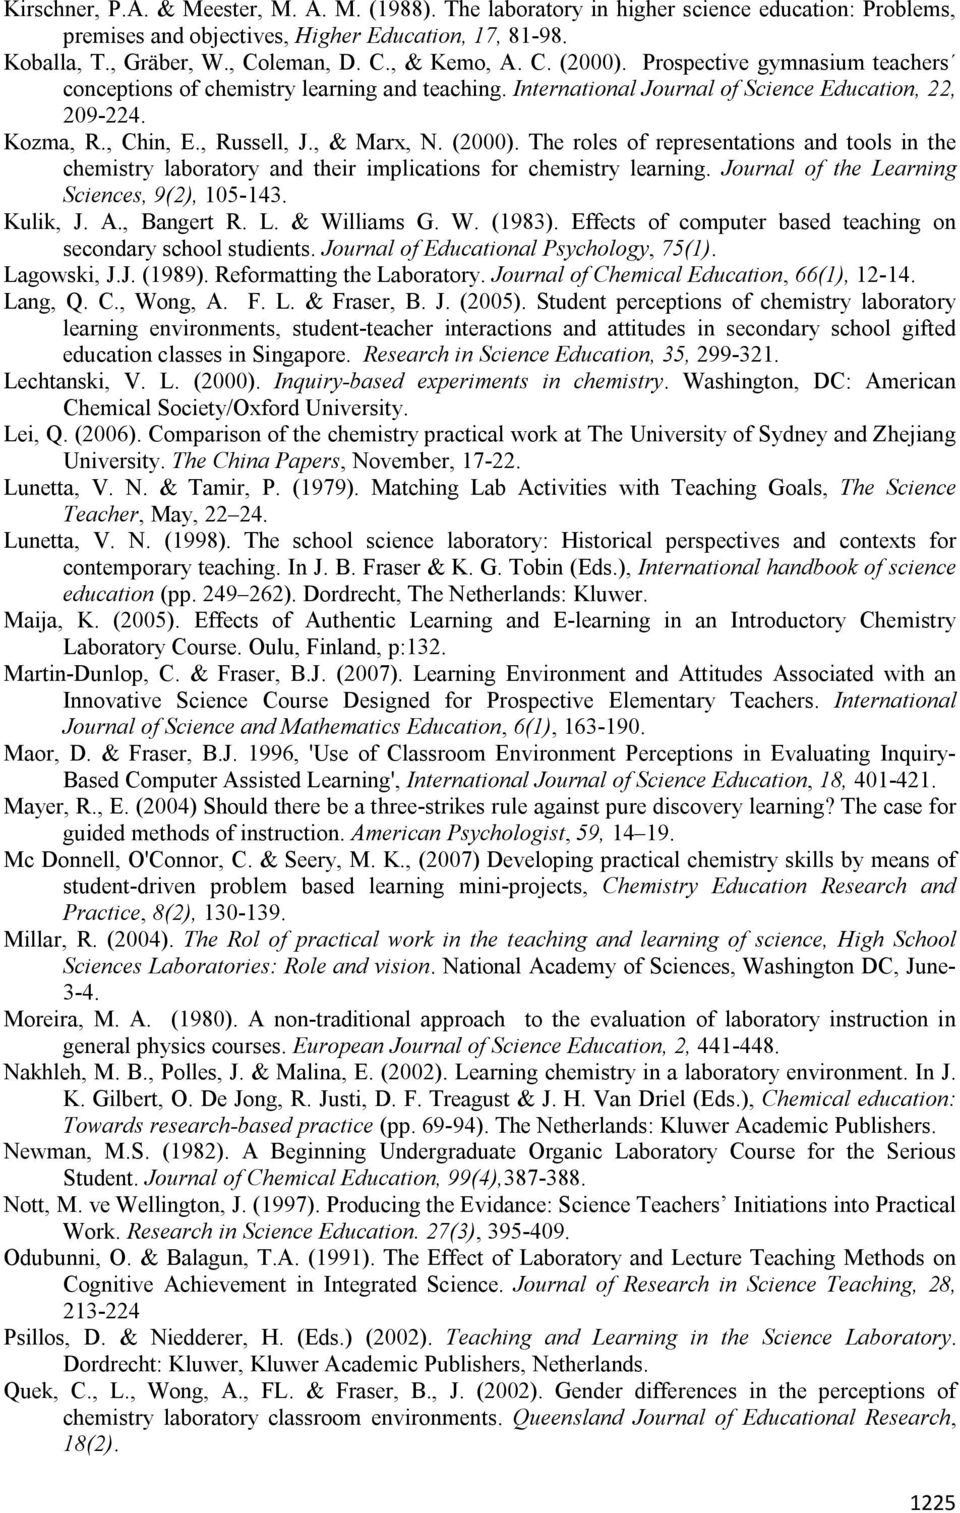 Journal of the Learning Sciences, 9(2), 105-143. Kulik, J. A., Bangert R. L. & Williams G. W. (1983). Effects of computer based teaching on secondary school studients.